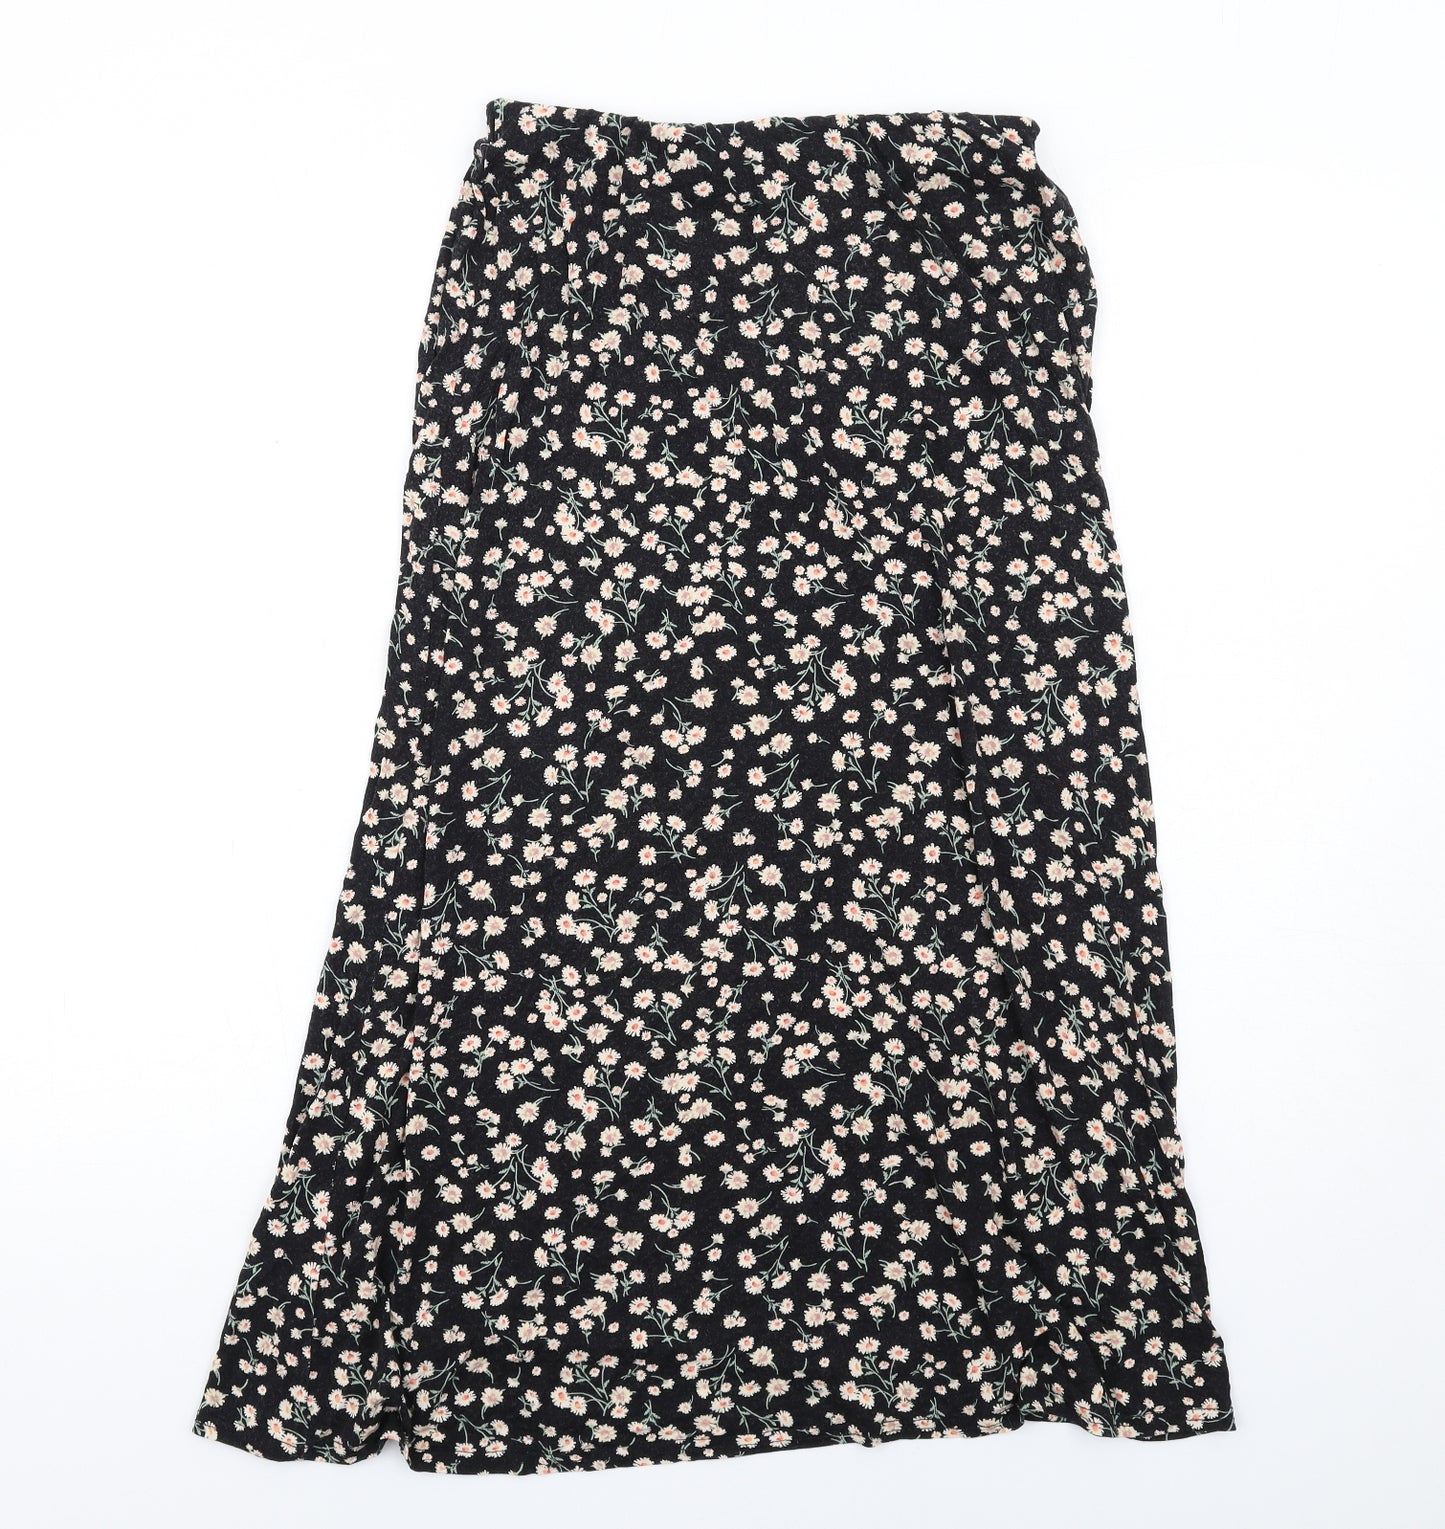 New Look Womens Black Floral Viscose Peasant Skirt Size 12